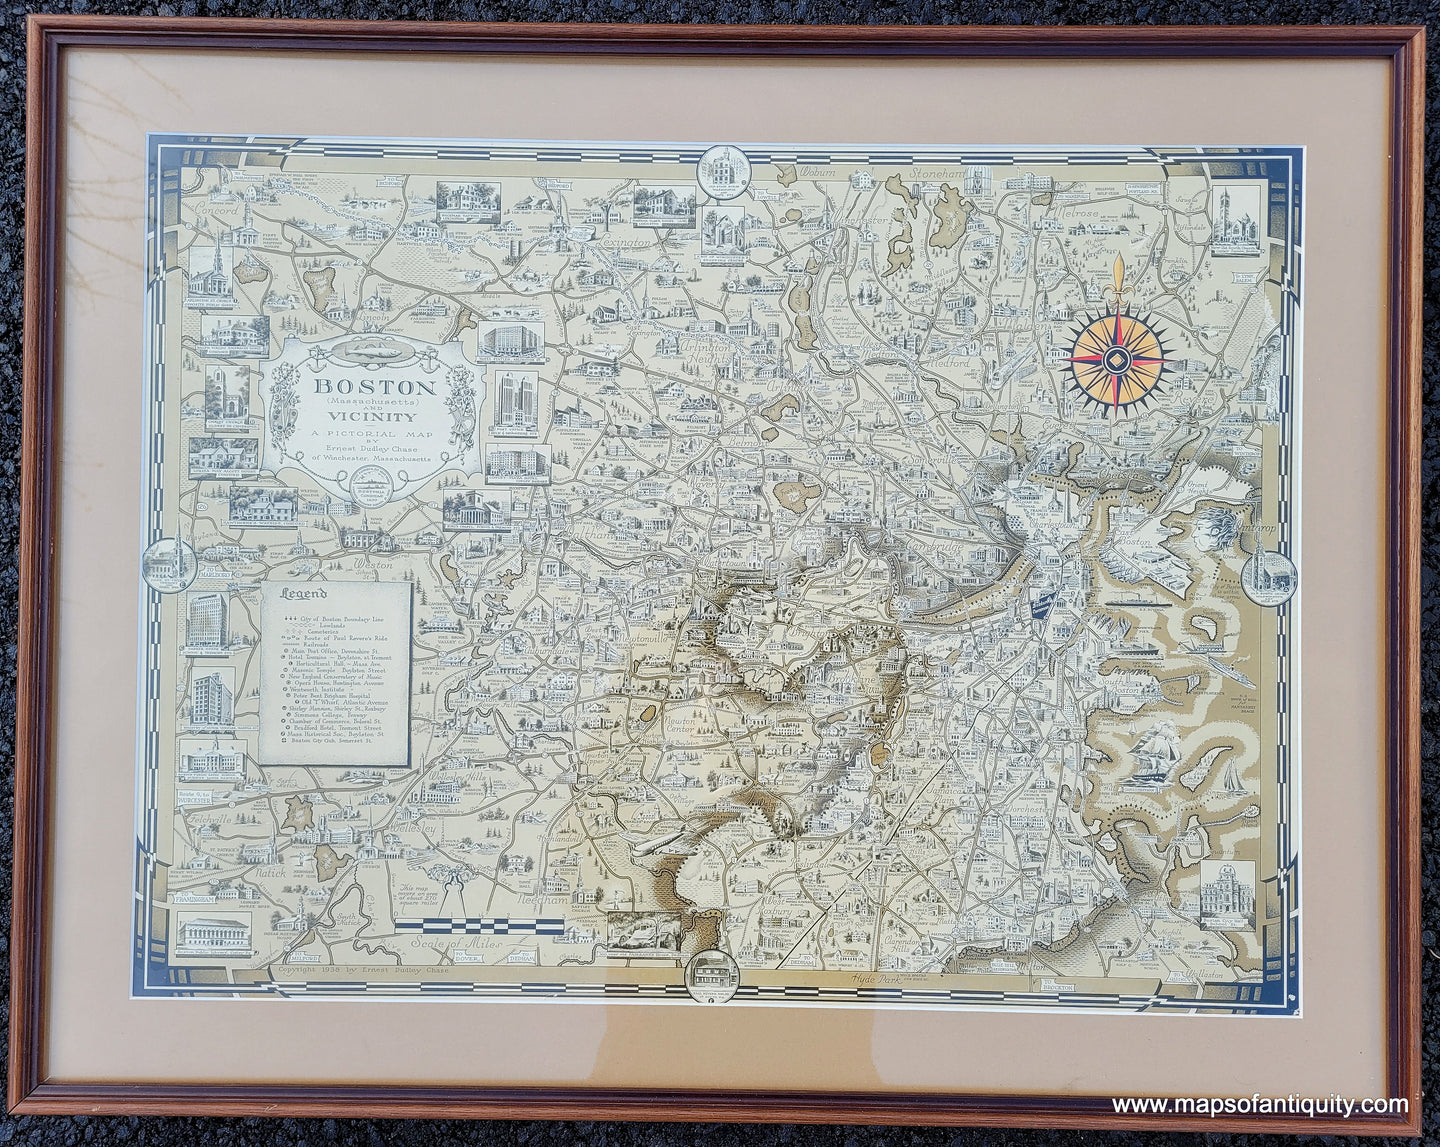 Framed-Antique-Pictorial-Map-Boston-(Massachusetts)-and-Vicinity-Massachusetts-Boston-1938-Ernest-Dudley-Chase-Maps-Of-Antiquity-20th-century